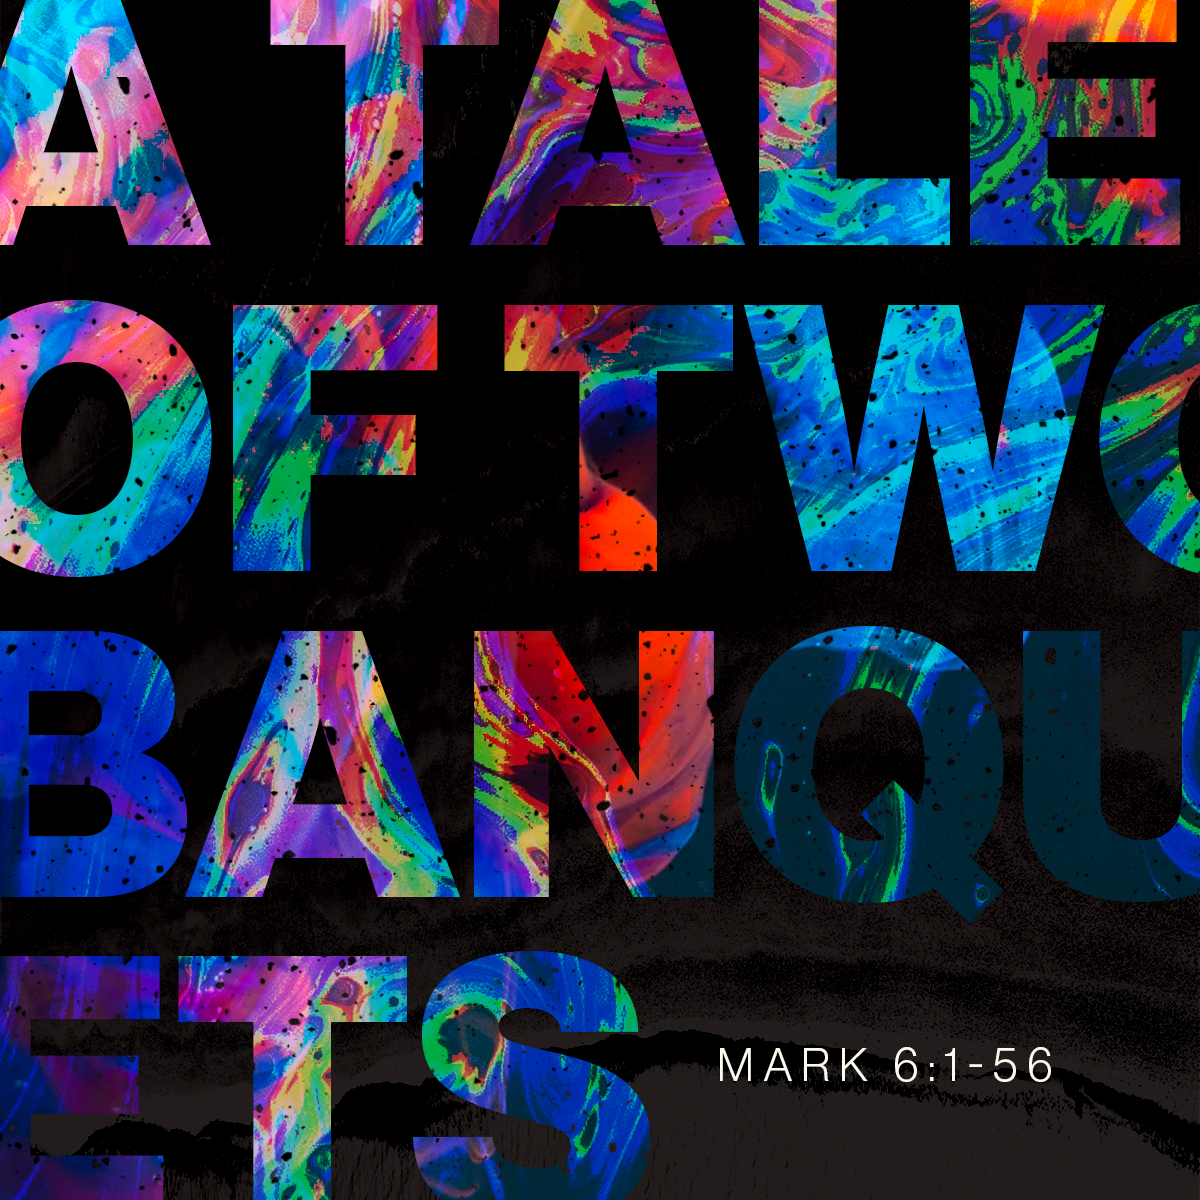 A Tale of Two Banquets (Mark 6:1-56)